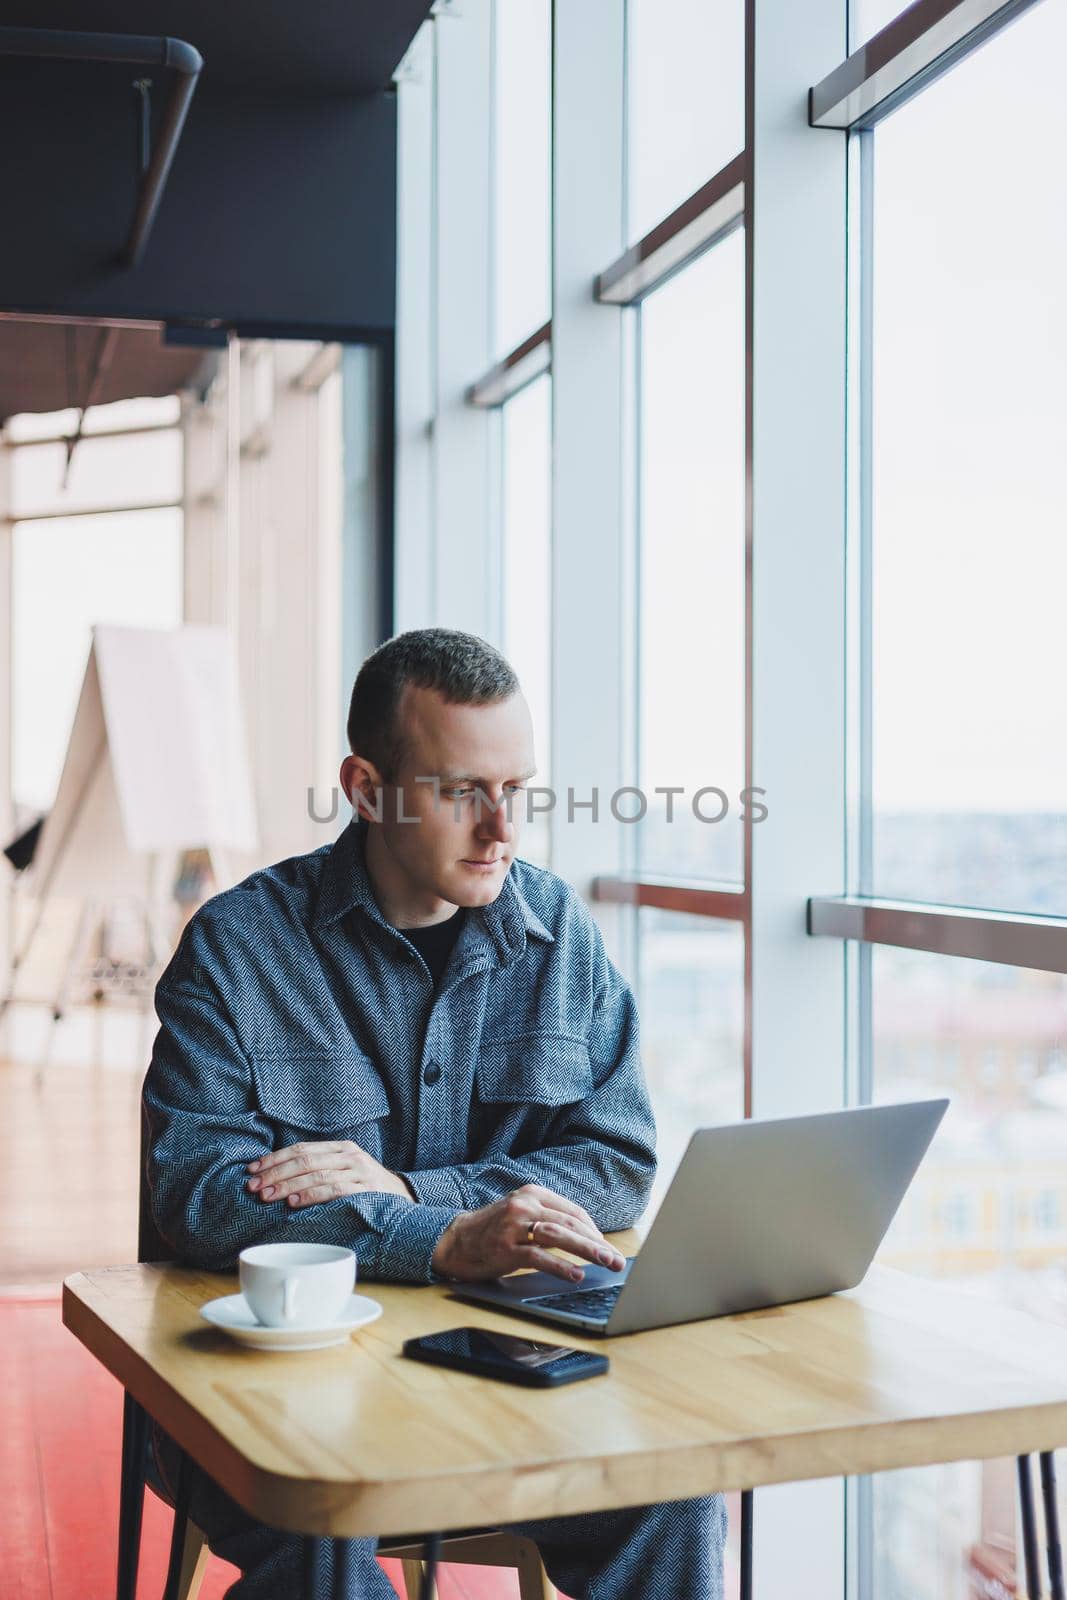 Successful happy business man is sitting at a table in a cafe, holding a cup of coffee and using a laptop.